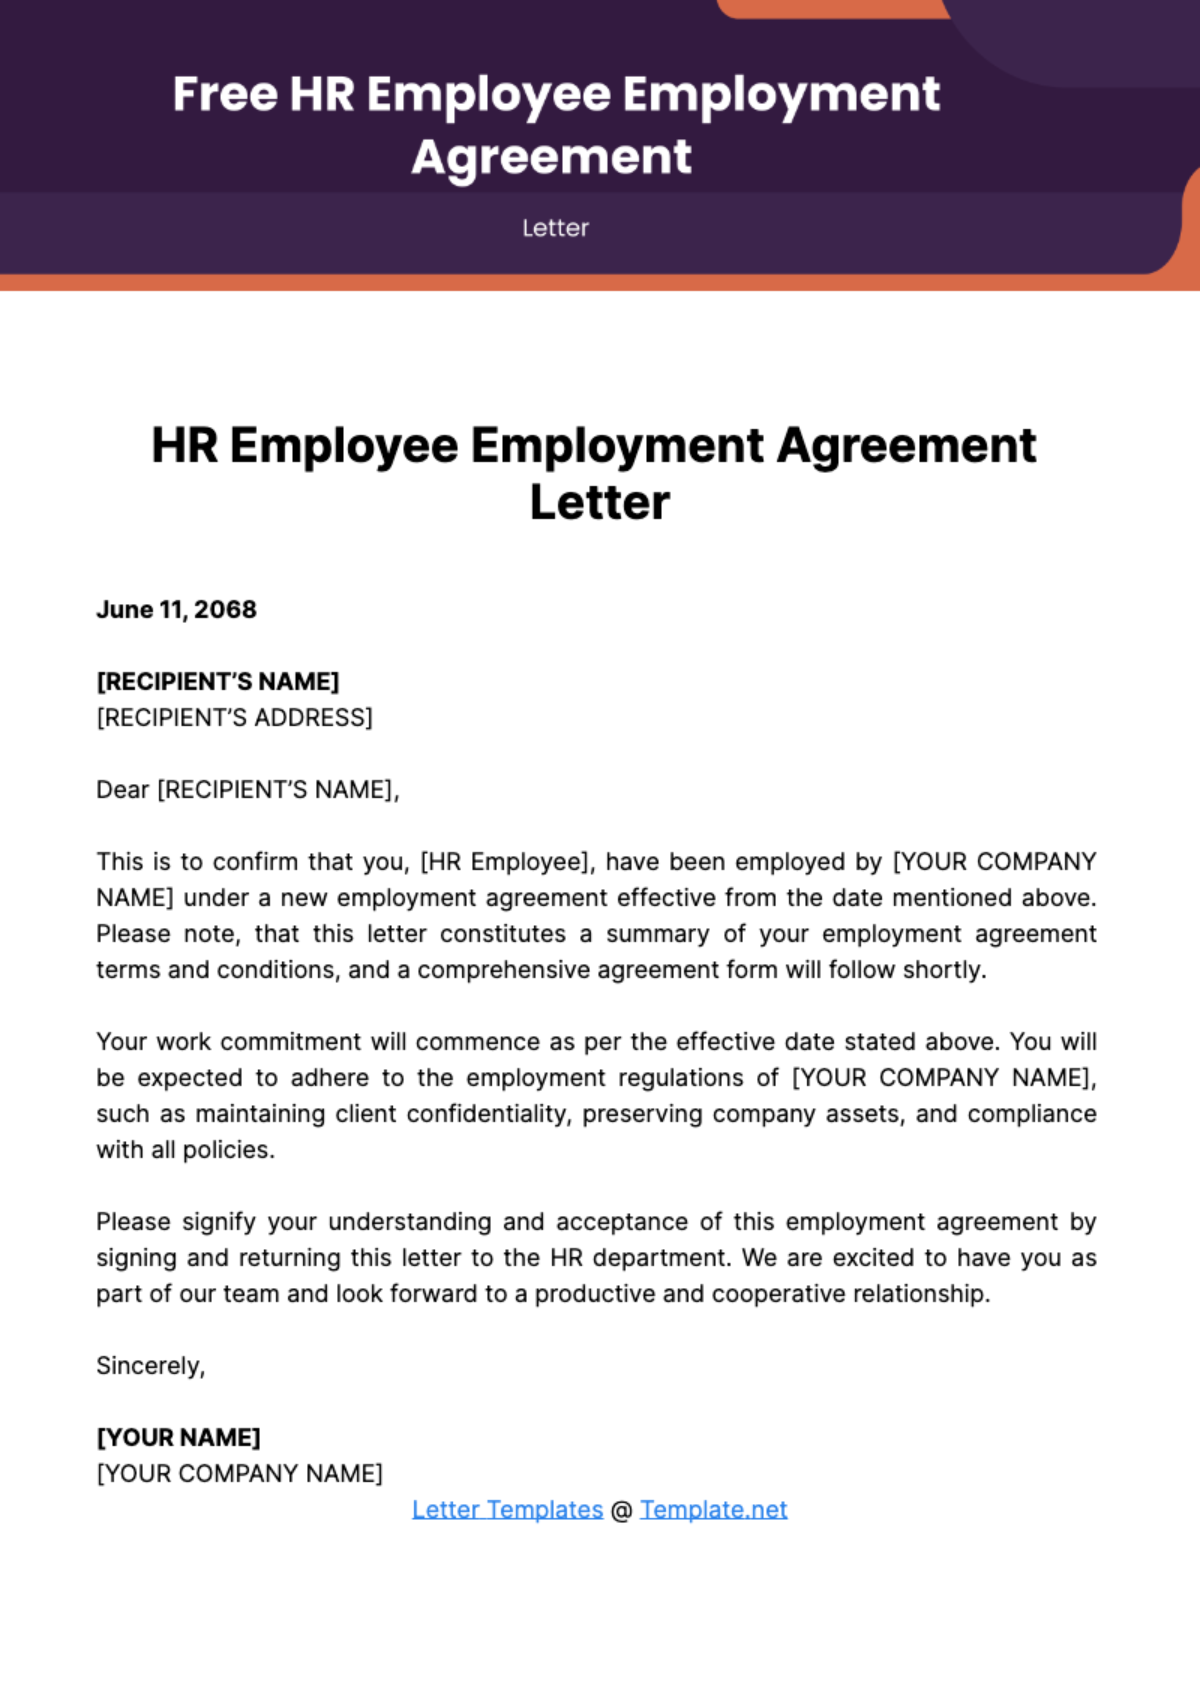 Free HR Employee Employment Agreement Letter Template